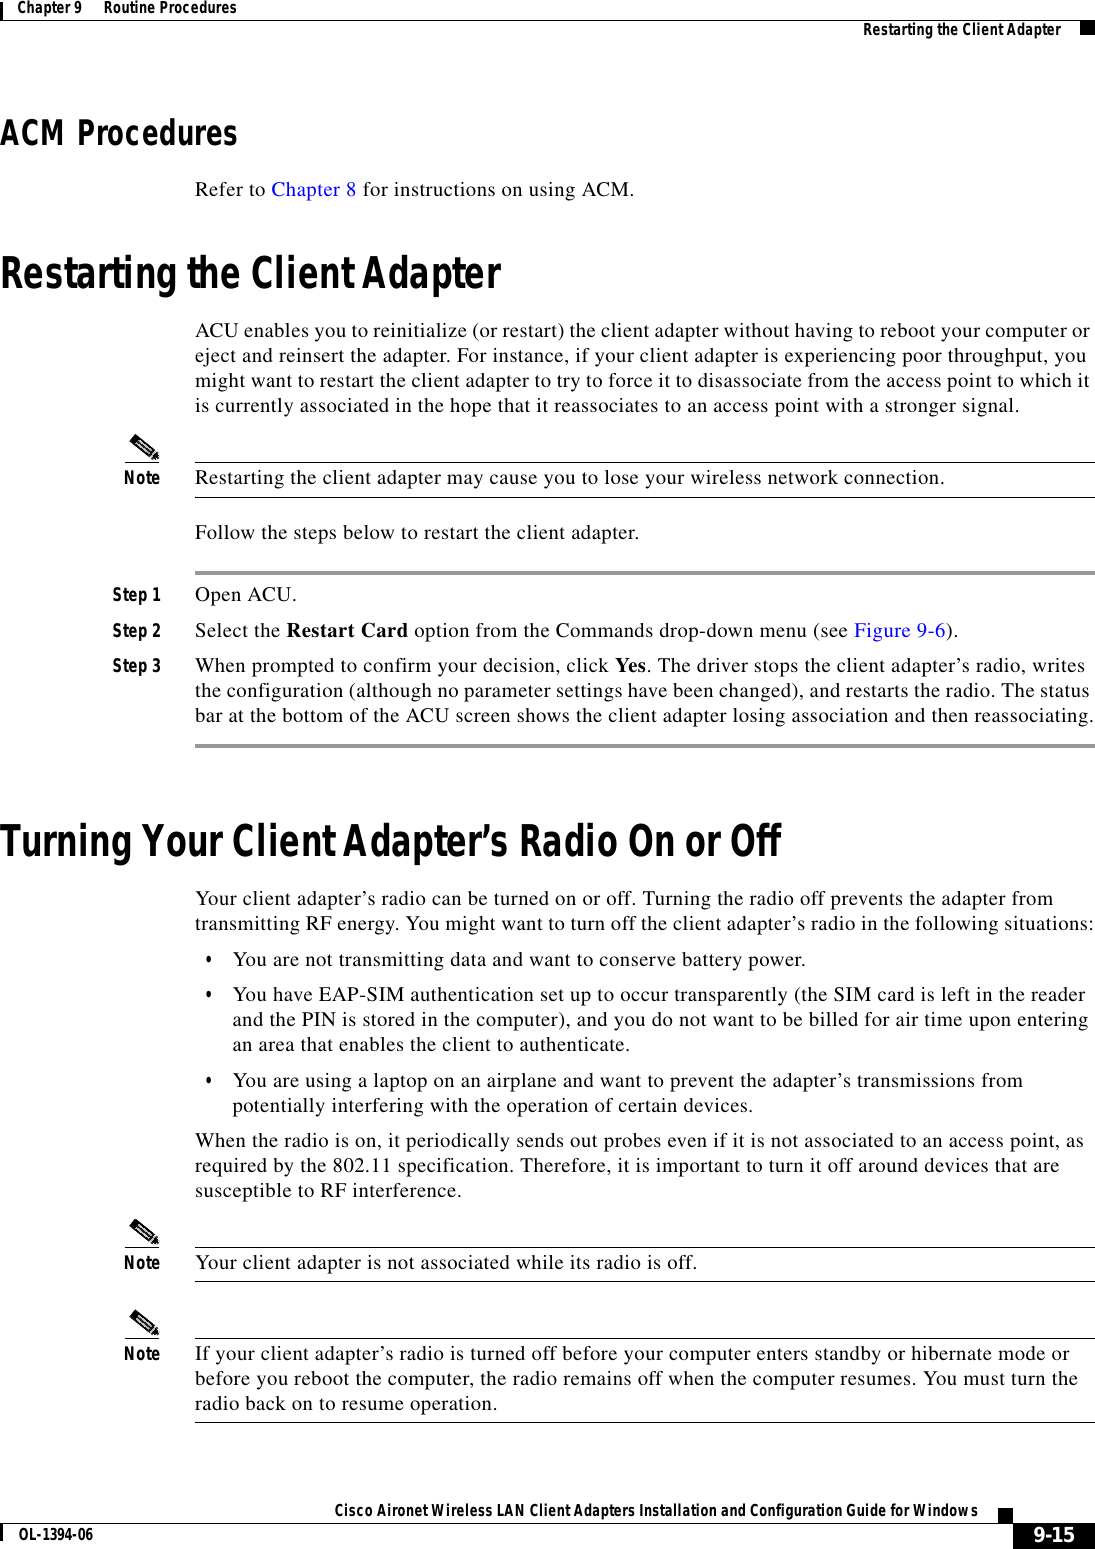 9-15Cisco Aironet Wireless LAN Client Adapters Installation and Configuration Guide for WindowsOL-1394-06Chapter 9      Routine Procedures Restarting the Client AdapterACM ProceduresRefer to Chapter 8 for instructions on using ACM.Restarting the Client AdapterACU enables you to reinitialize (or restart) the client adapter without having to reboot your computer or eject and reinsert the adapter. For instance, if your client adapter is experiencing poor throughput, you might want to restart the client adapter to try to force it to disassociate from the access point to which it is currently associated in the hope that it reassociates to an access point with a stronger signal.Note Restarting the client adapter may cause you to lose your wireless network connection.Follow the steps below to restart the client adapter.Step 1 Open ACU.Step 2 Select the Restart Card option from the Commands drop-down menu (see Figure 9-6).Step 3 When prompted to confirm your decision, click Yes. The driver stops the client adapter’s radio, writes the configuration (although no parameter settings have been changed), and restarts the radio. The status bar at the bottom of the ACU screen shows the client adapter losing association and then reassociating.Turning Your Client Adapter’s Radio On or OffYour client adapter’s radio can be turned on or off. Turning the radio off prevents the adapter from transmitting RF energy. You might want to turn off the client adapter’s radio in the following situations:•You are not transmitting data and want to conserve battery power.•You have EAP-SIM authentication set up to occur transparently (the SIM card is left in the reader and the PIN is stored in the computer), and you do not want to be billed for air time upon entering an area that enables the client to authenticate.•You are using a laptop on an airplane and want to prevent the adapter’s transmissions from potentially interfering with the operation of certain devices.When the radio is on, it periodically sends out probes even if it is not associated to an access point, as required by the 802.11 specification. Therefore, it is important to turn it off around devices that are susceptible to RF interference.Note Your client adapter is not associated while its radio is off.Note If your client adapter’s radio is turned off before your computer enters standby or hibernate mode or before you reboot the computer, the radio remains off when the computer resumes. You must turn the radio back on to resume operation.